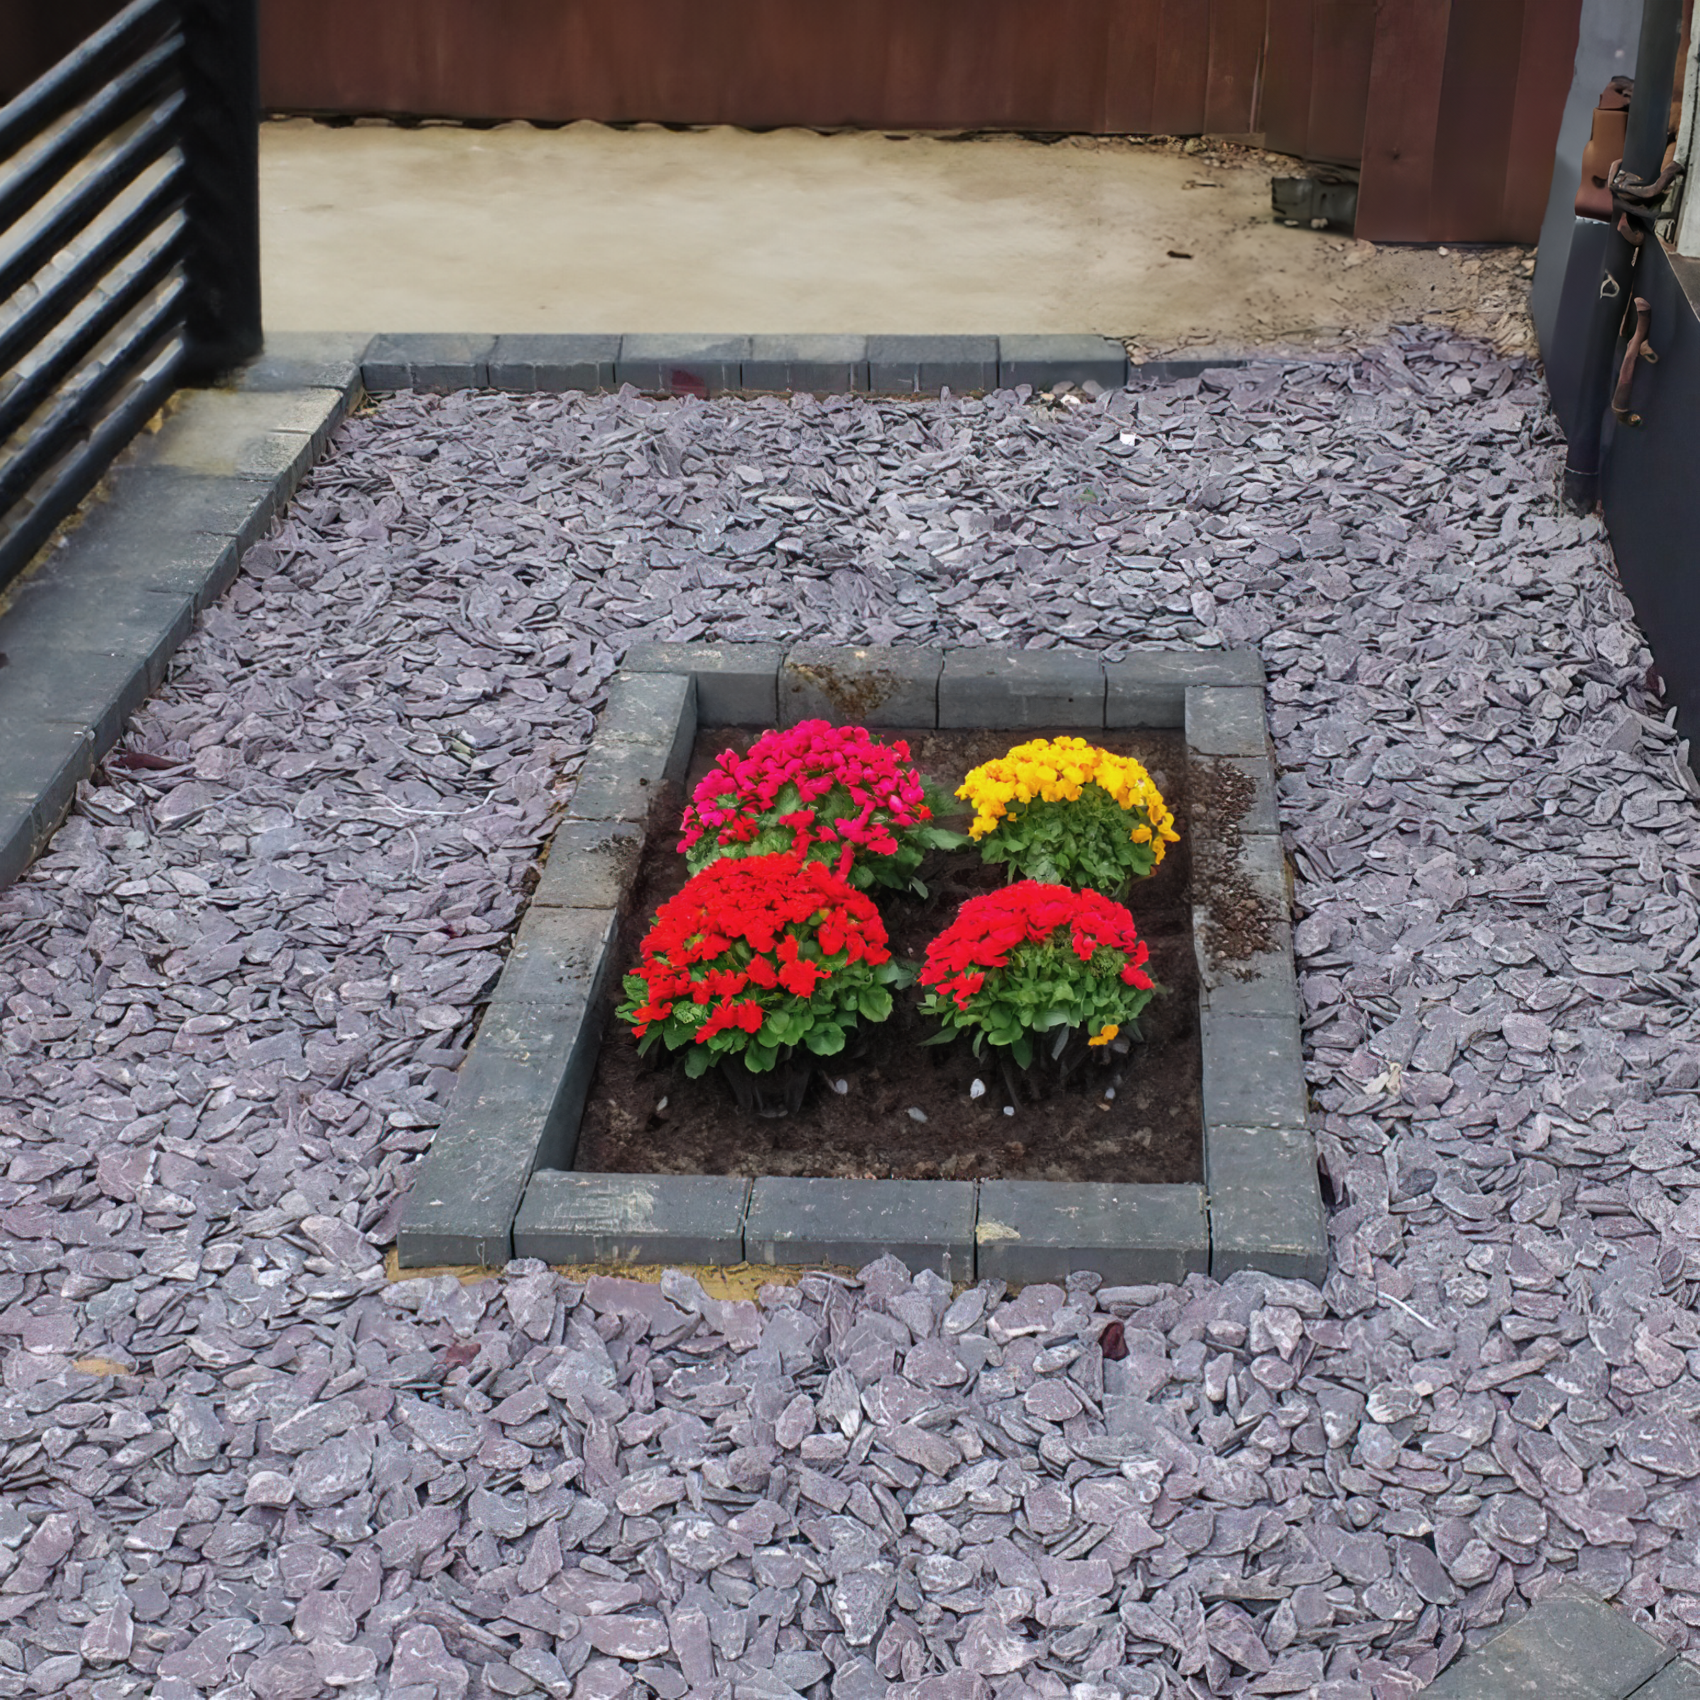 A small garden area featuring a rectangular flower bed with vibrant red and yellow flowers. The bed is bordered by dark stone bricks and surrounded by Brisks 20mm Mixed Blue & Plum Slate Chippings. The background includes a wooden fence and a paved area, adding to the overall landscaping charm.